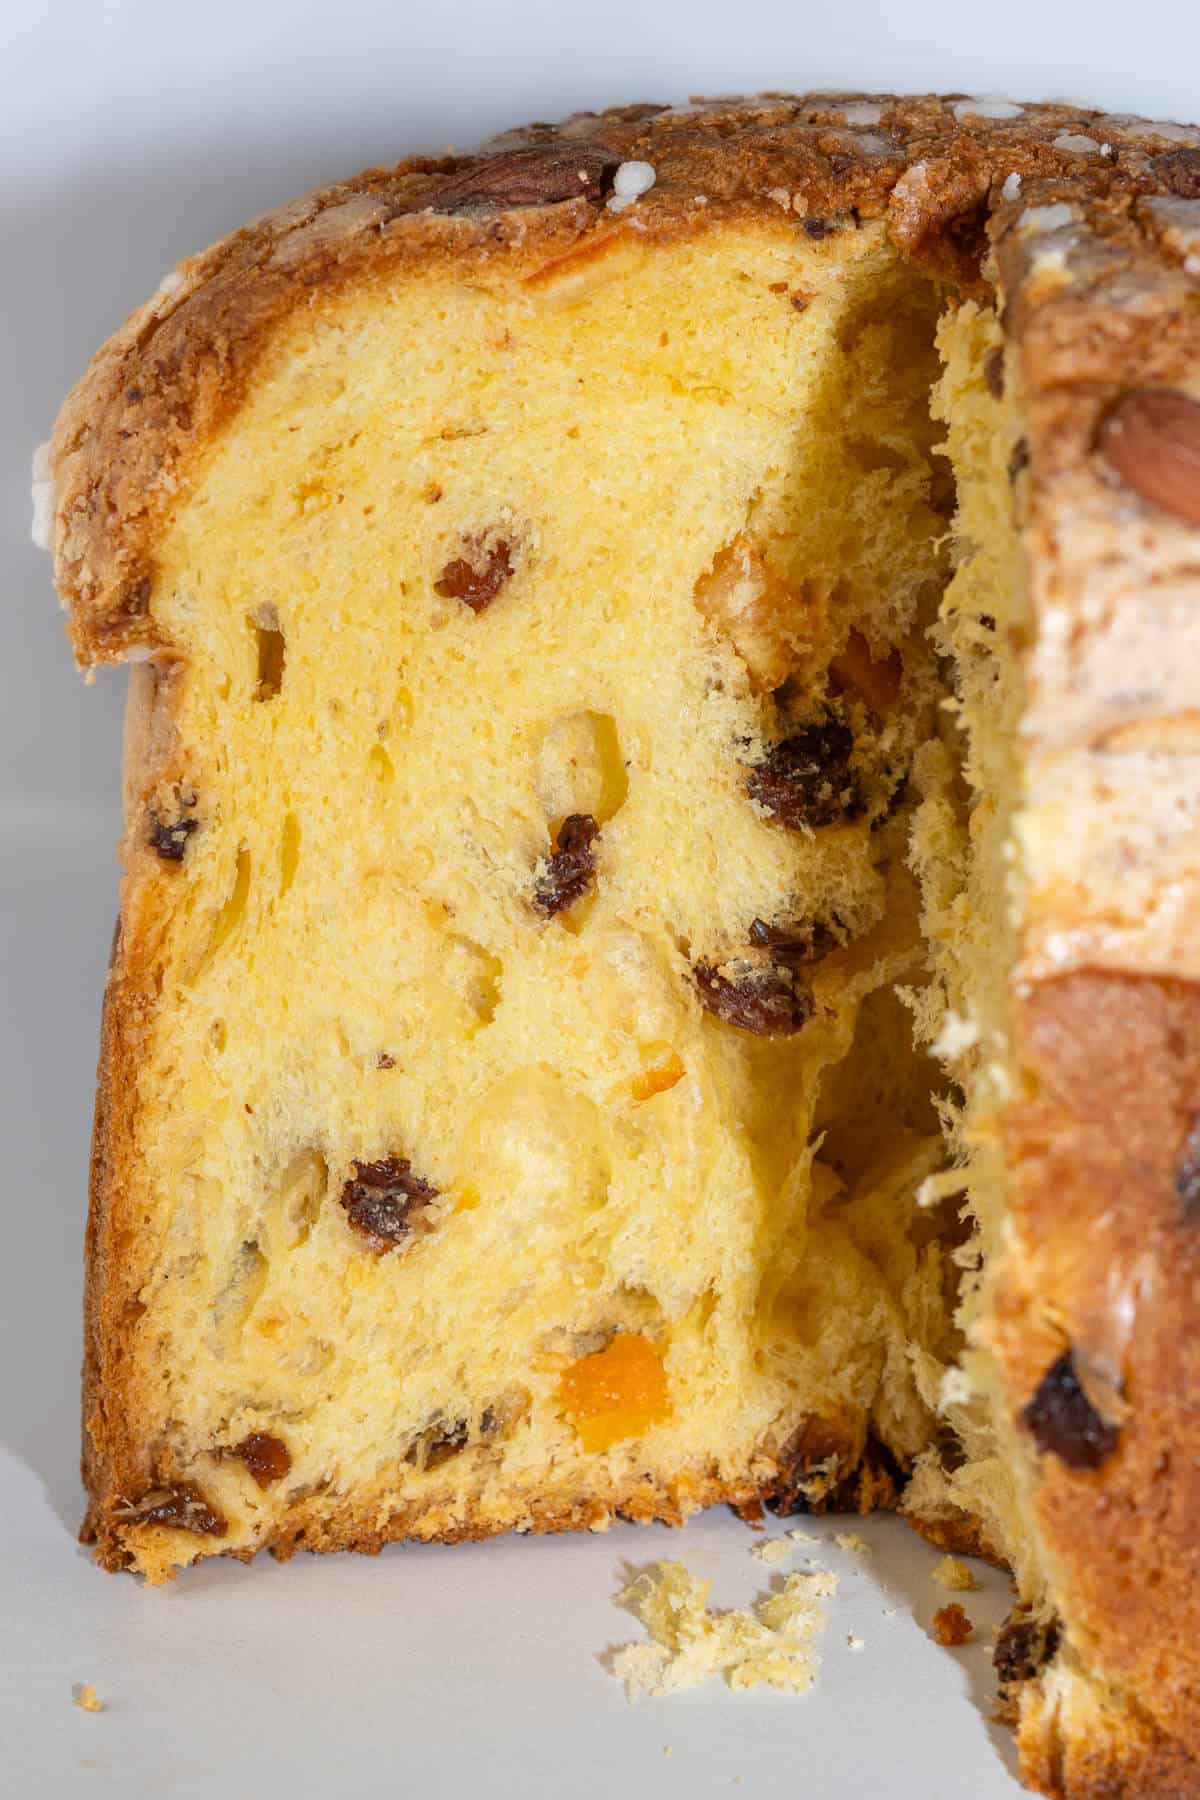 Inside look of a panettone with a piece missing